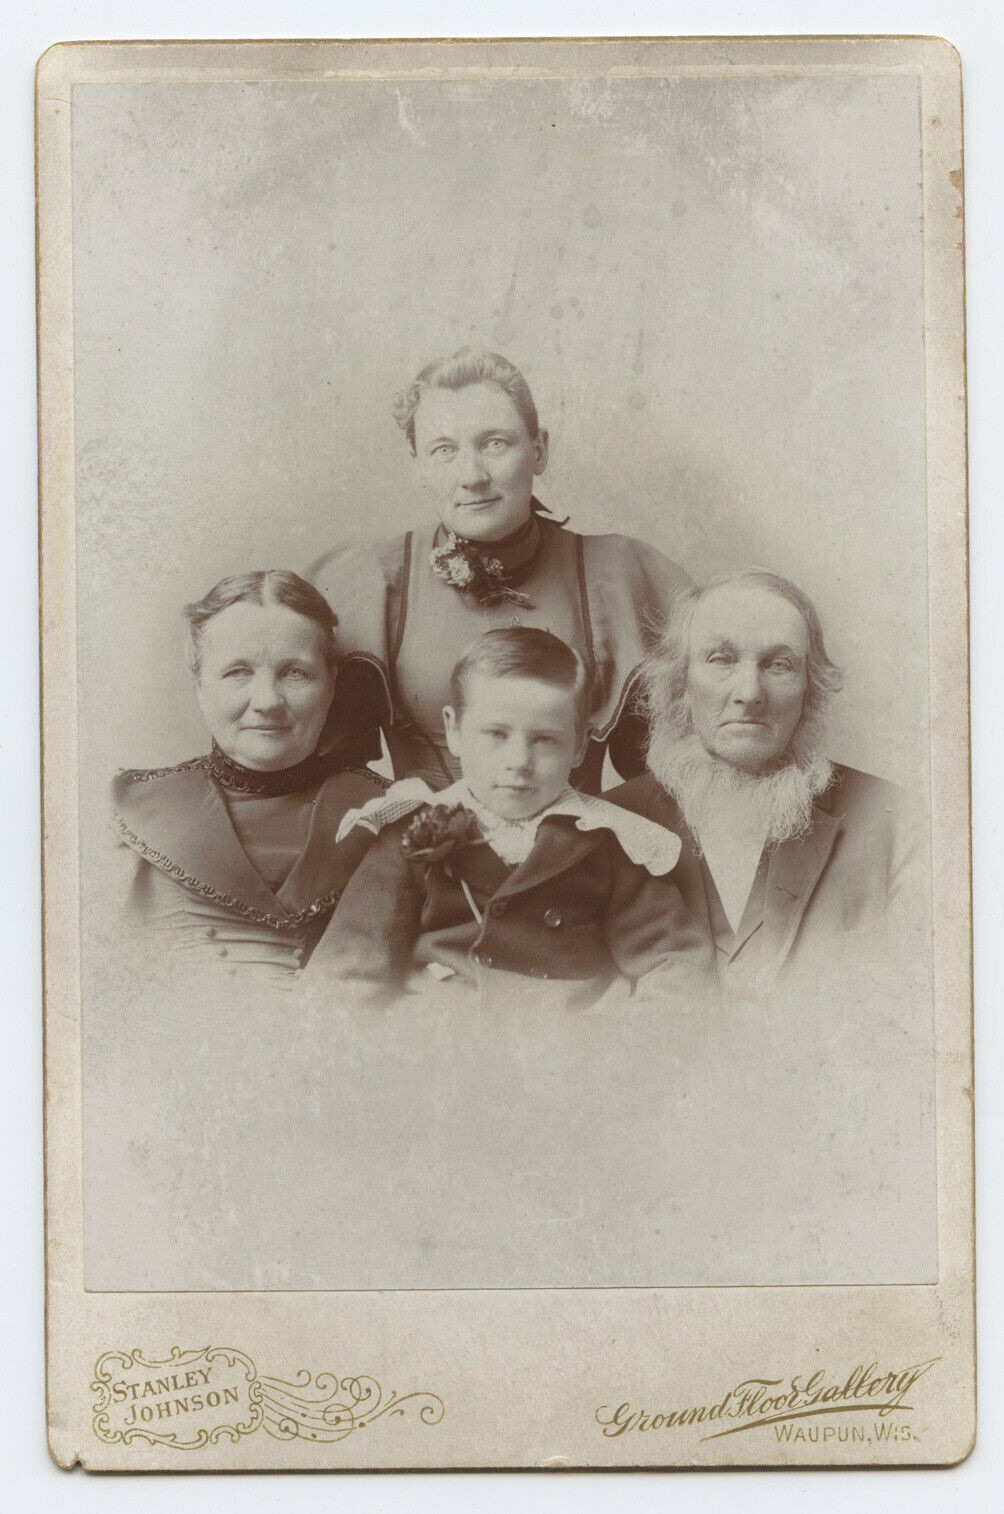 Antique Cabinet Card Family Photograph By Stanley Johnson Waupun WIS